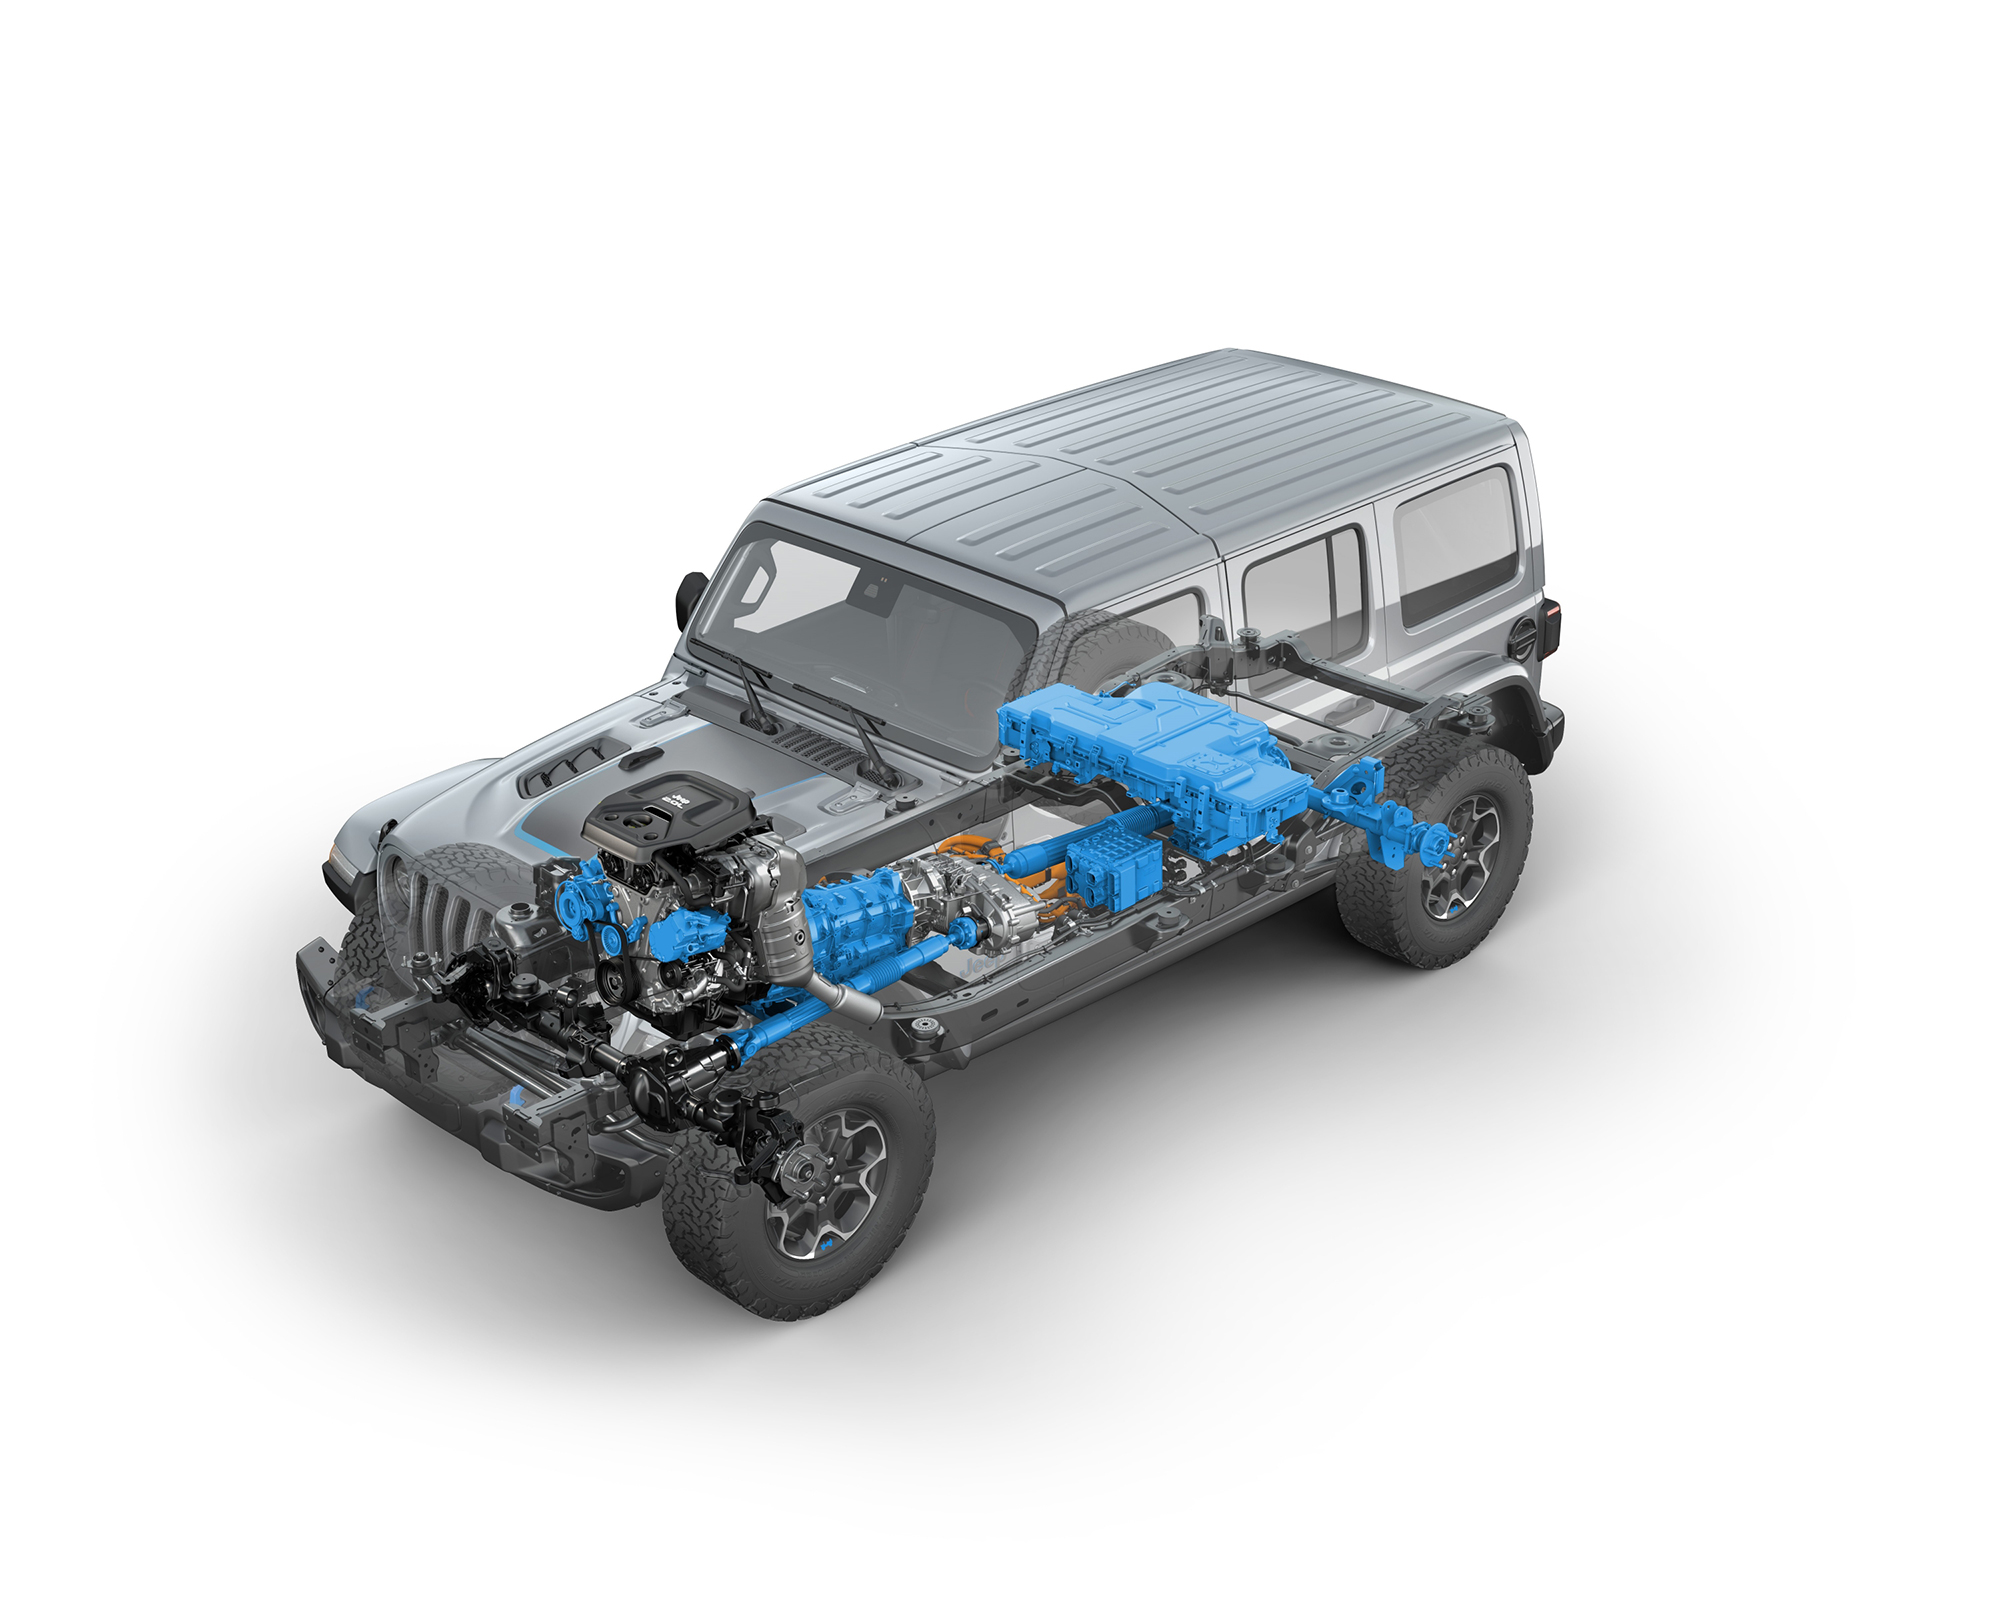 The 4xe uses a gas and electric engines to power the drivetrain.